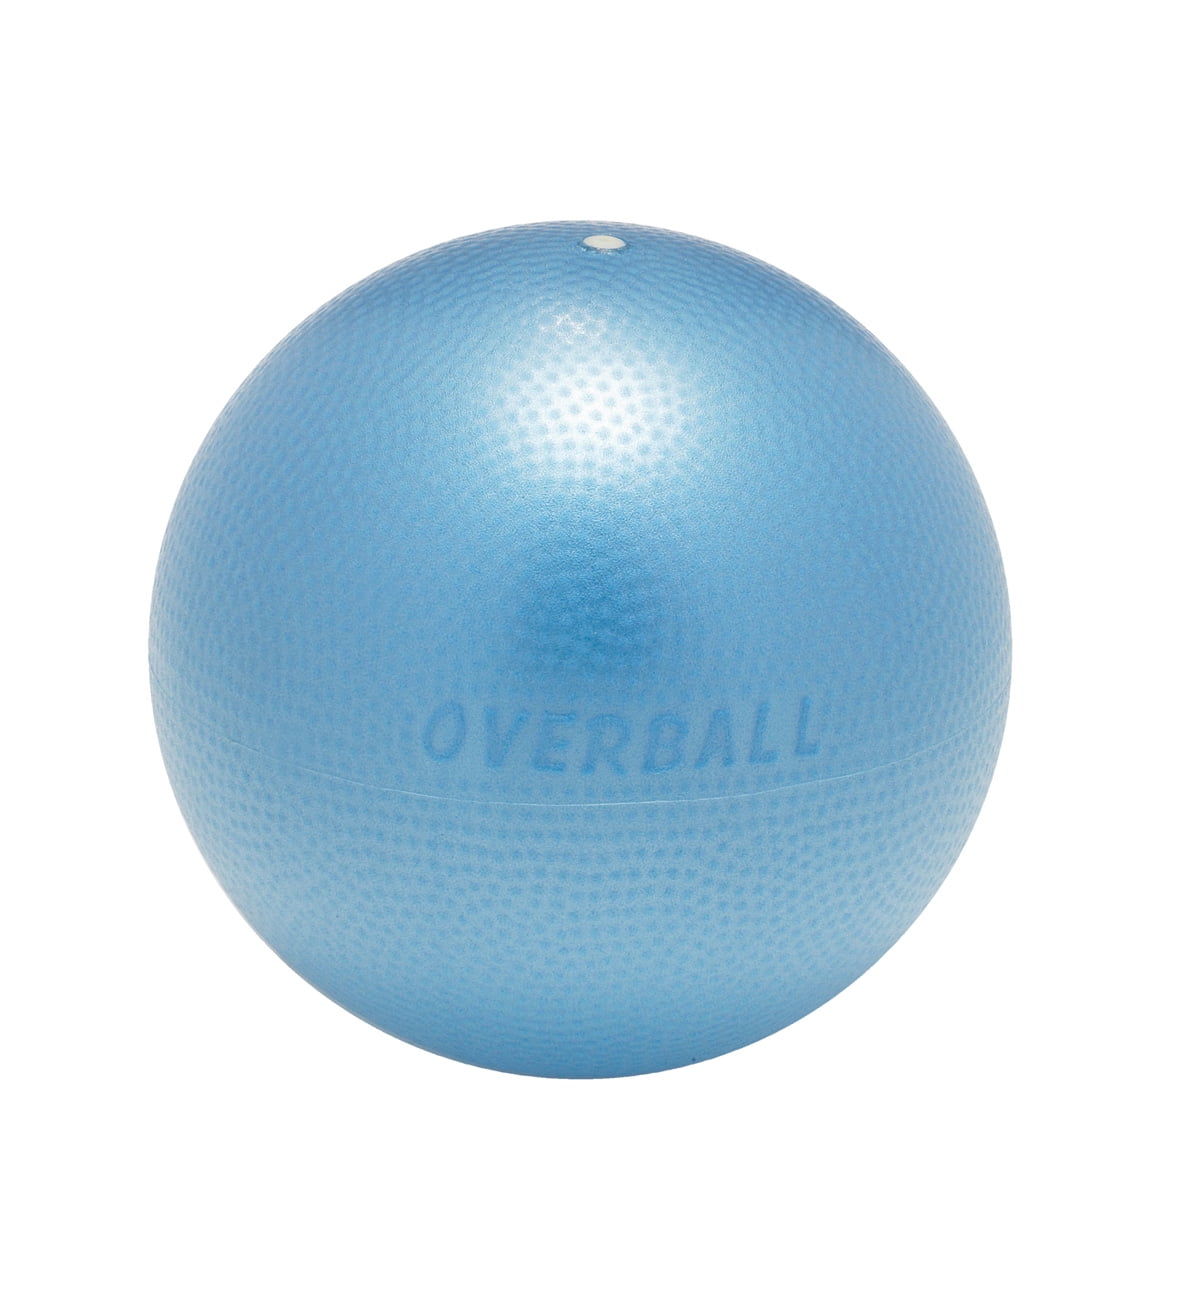 Gymnic Over Ball 9 inch, Blue, 9 8011BLUE 